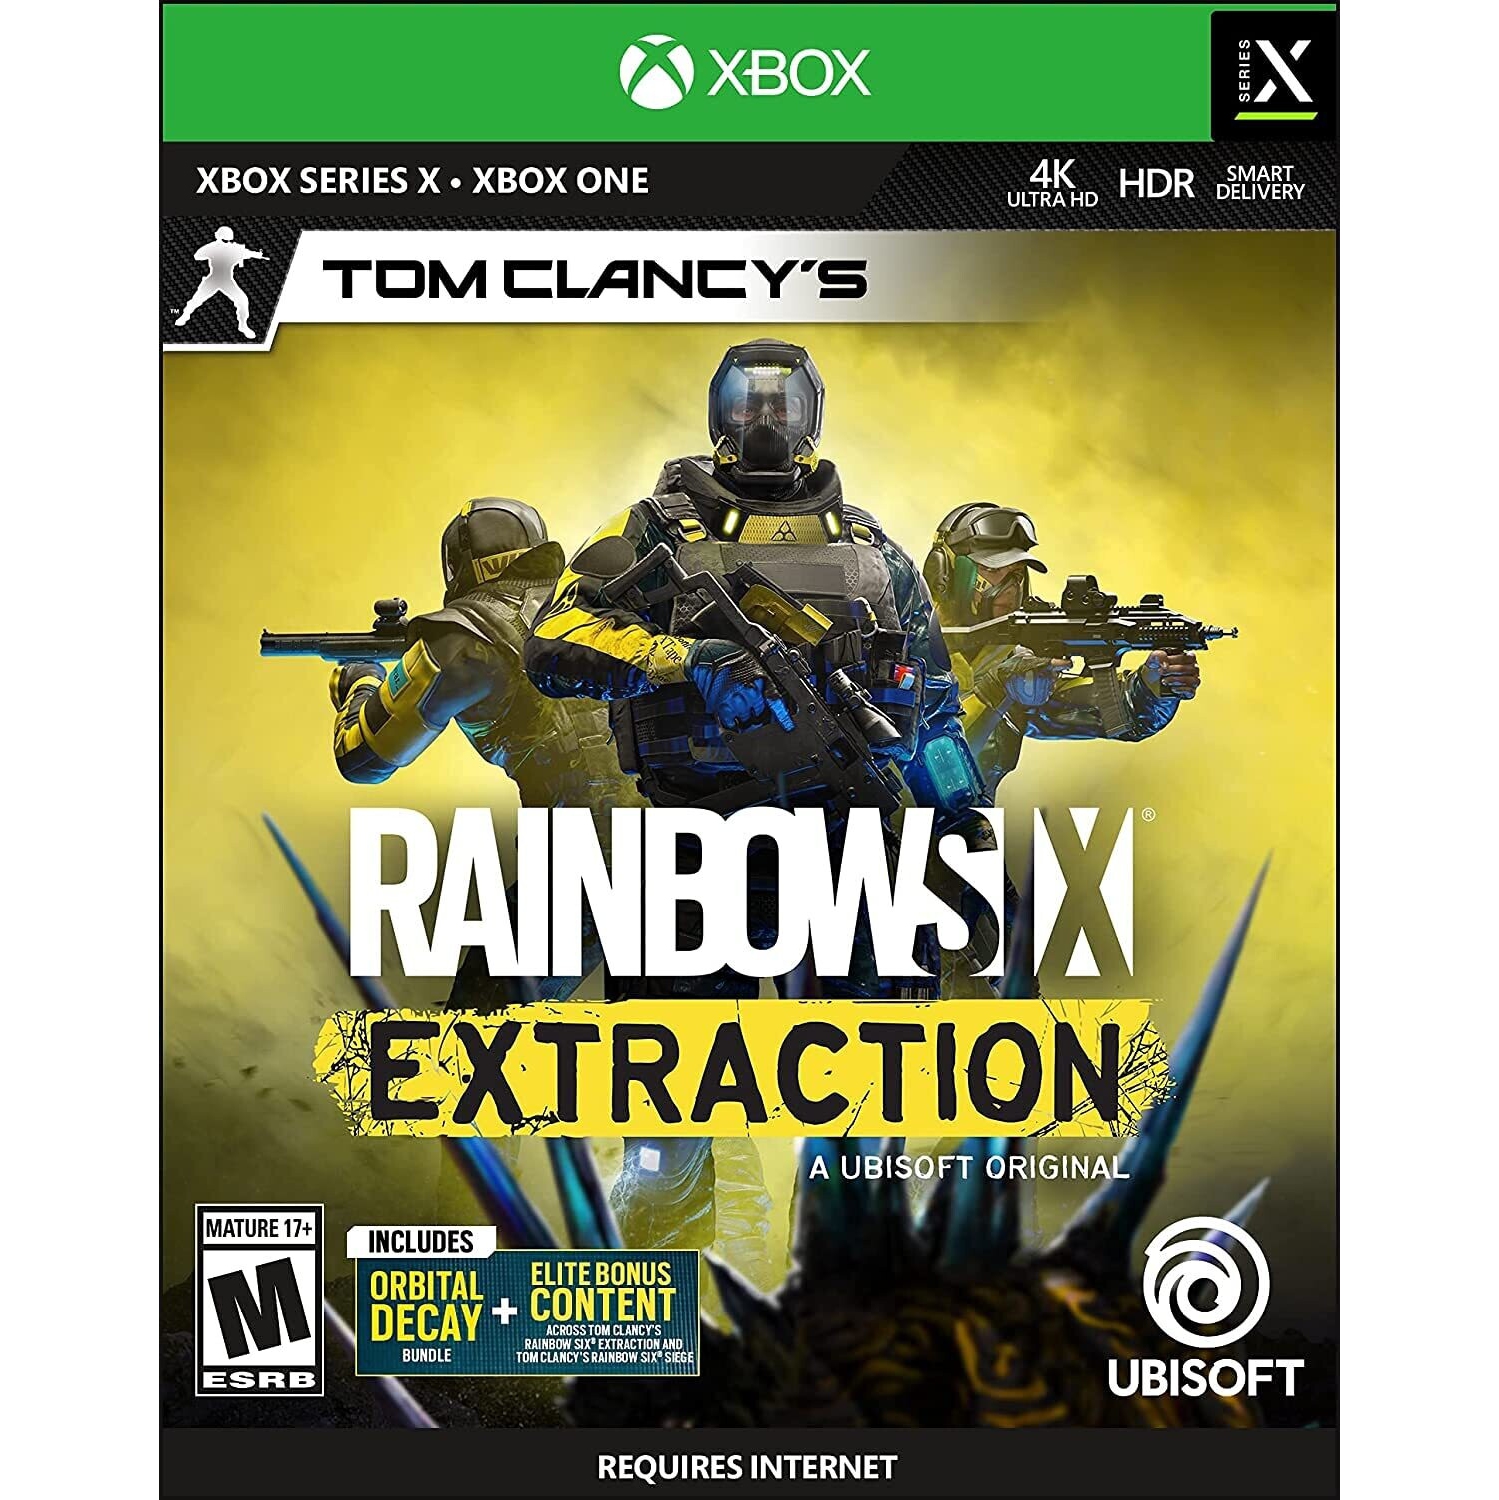 Tom Clancy's Rainbow Six Extraction Standard Edition for Xbox One and Xbox Series X [VIDEOGAMES]